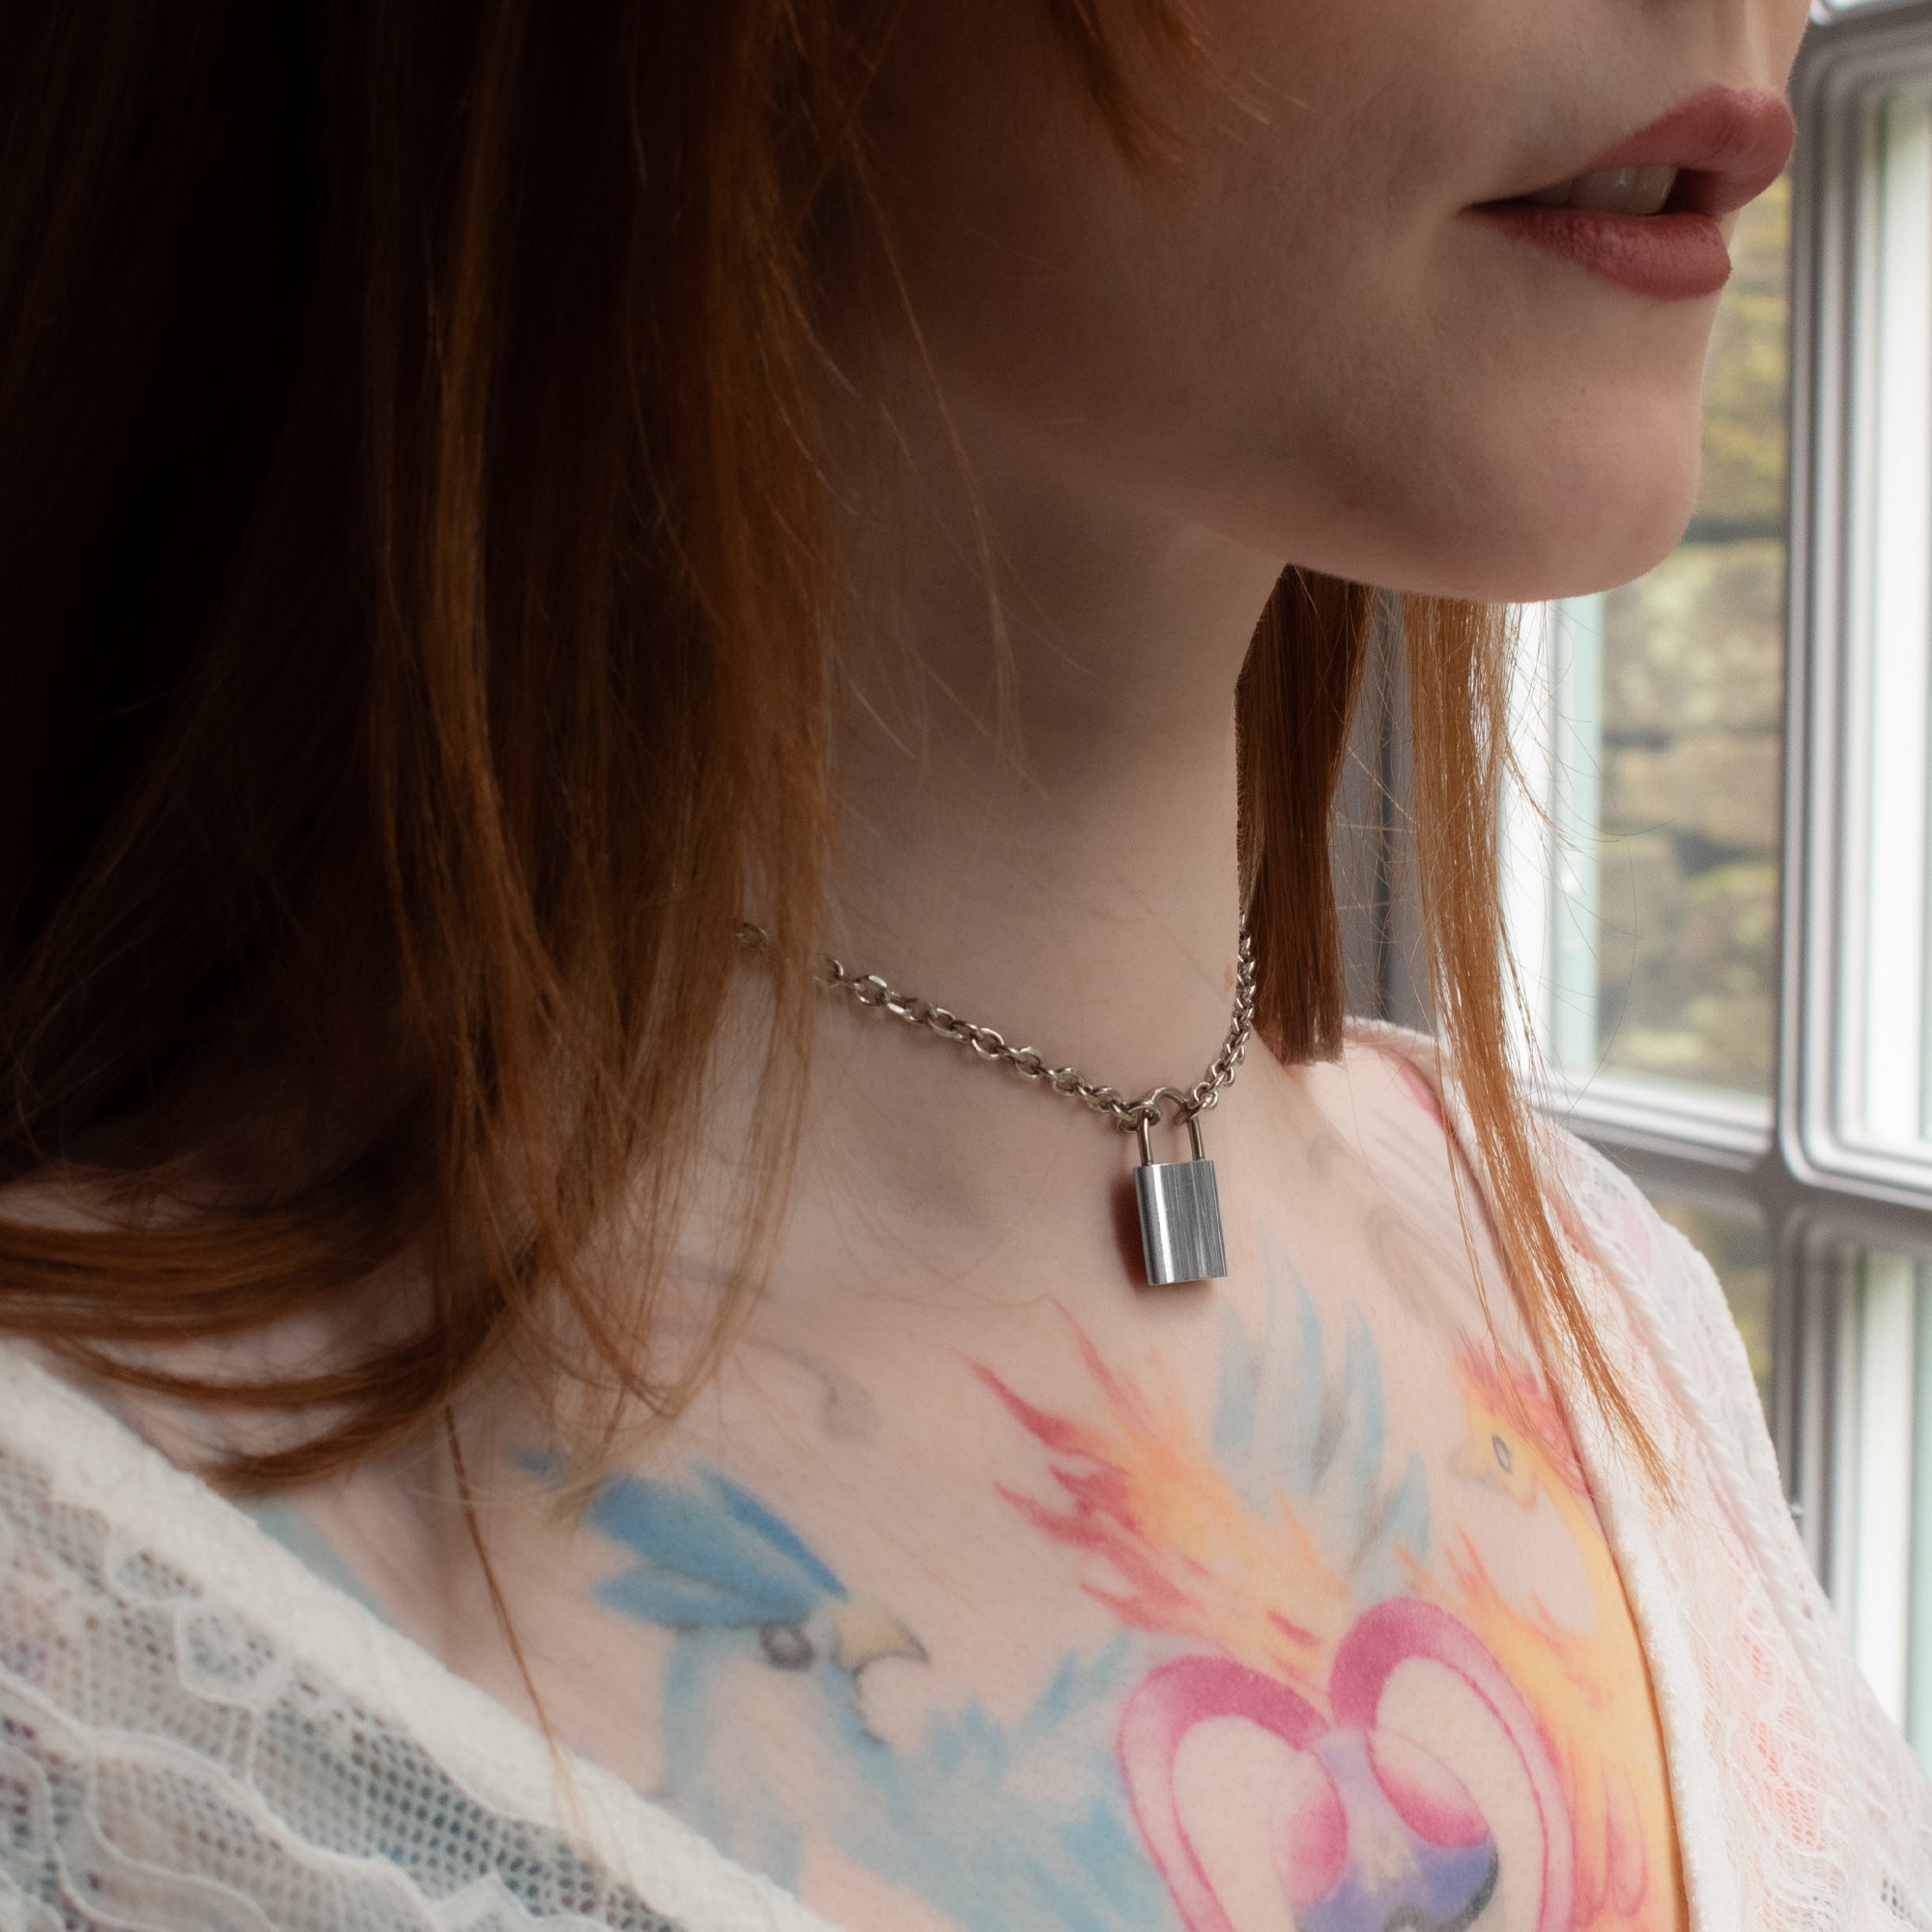 model with red hair and tattoos wears a 25mm large stainless steel padlock pendant day collar necklace